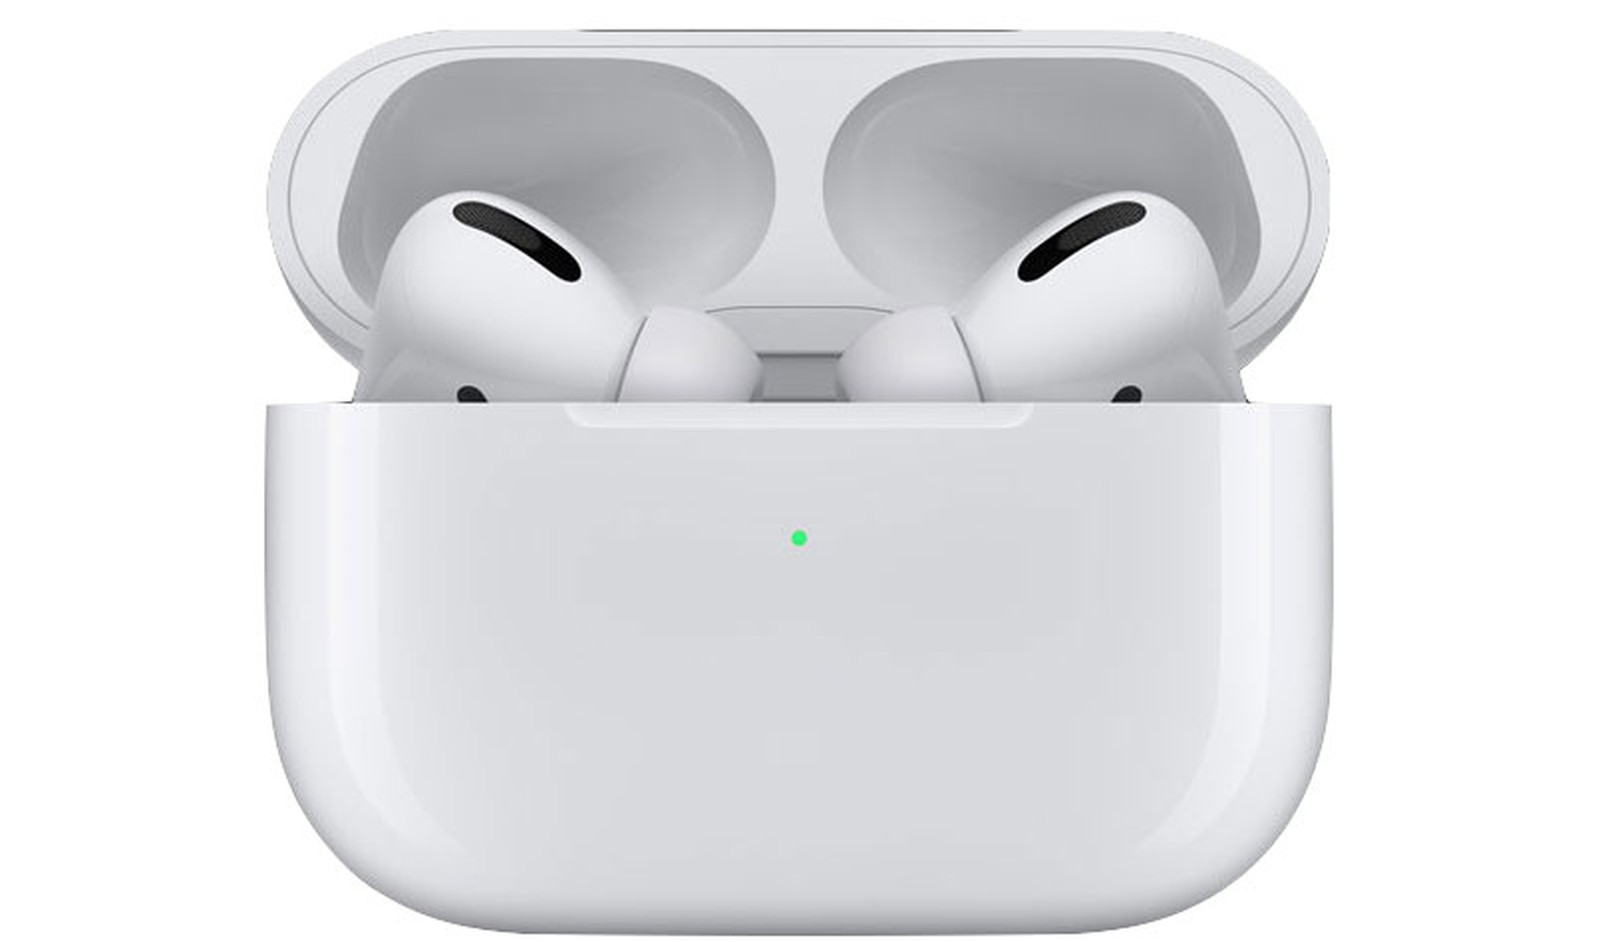 Apple Reportedly Lowering Airpods Production Due To Decreasing Sales